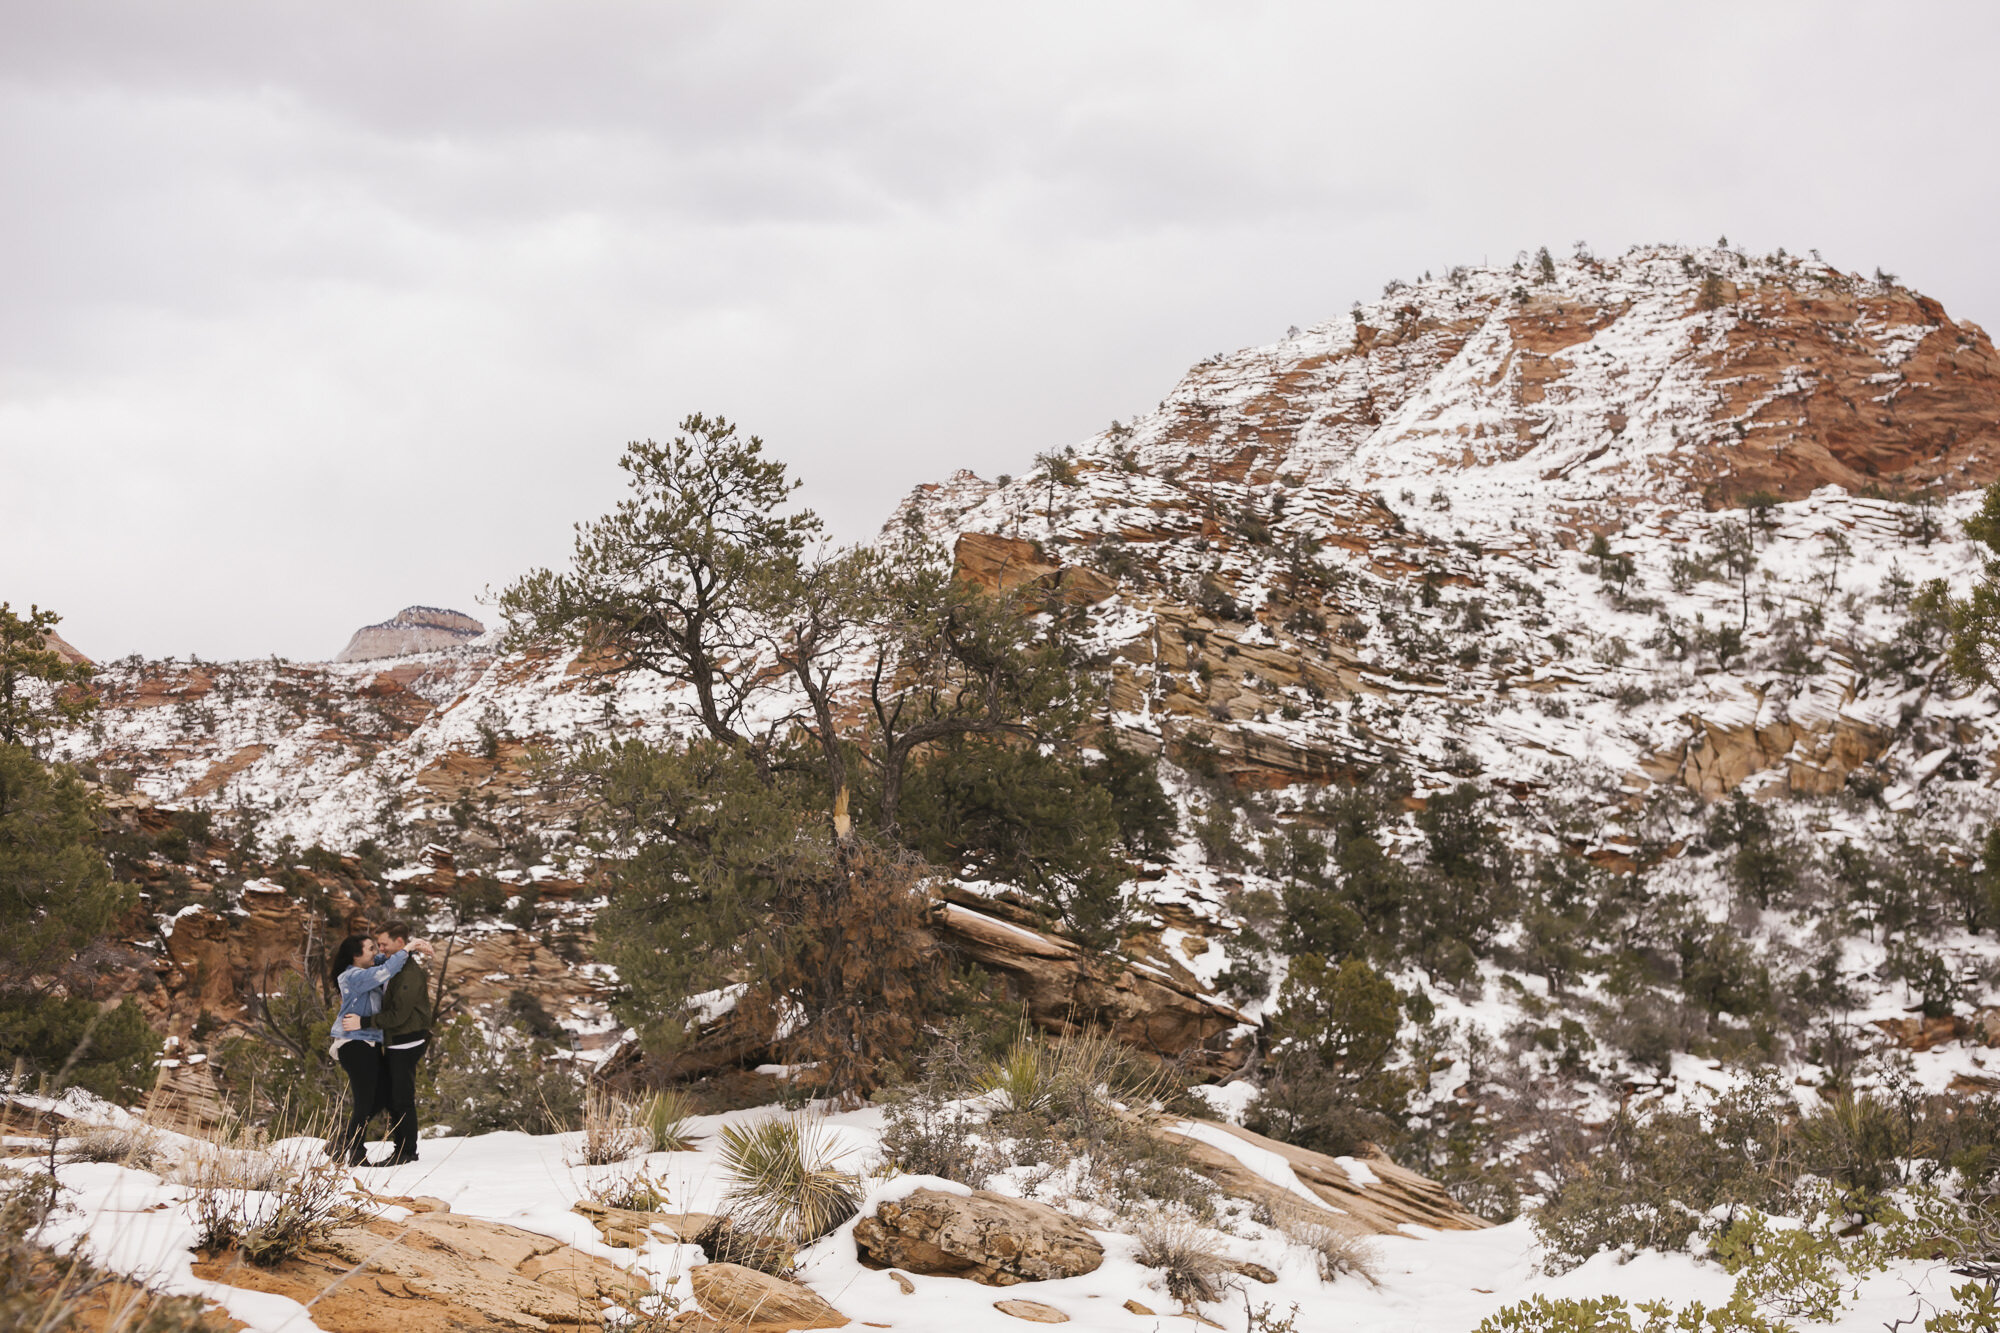 Engagement session in Zion National Park in the winter with snow on the red rocks